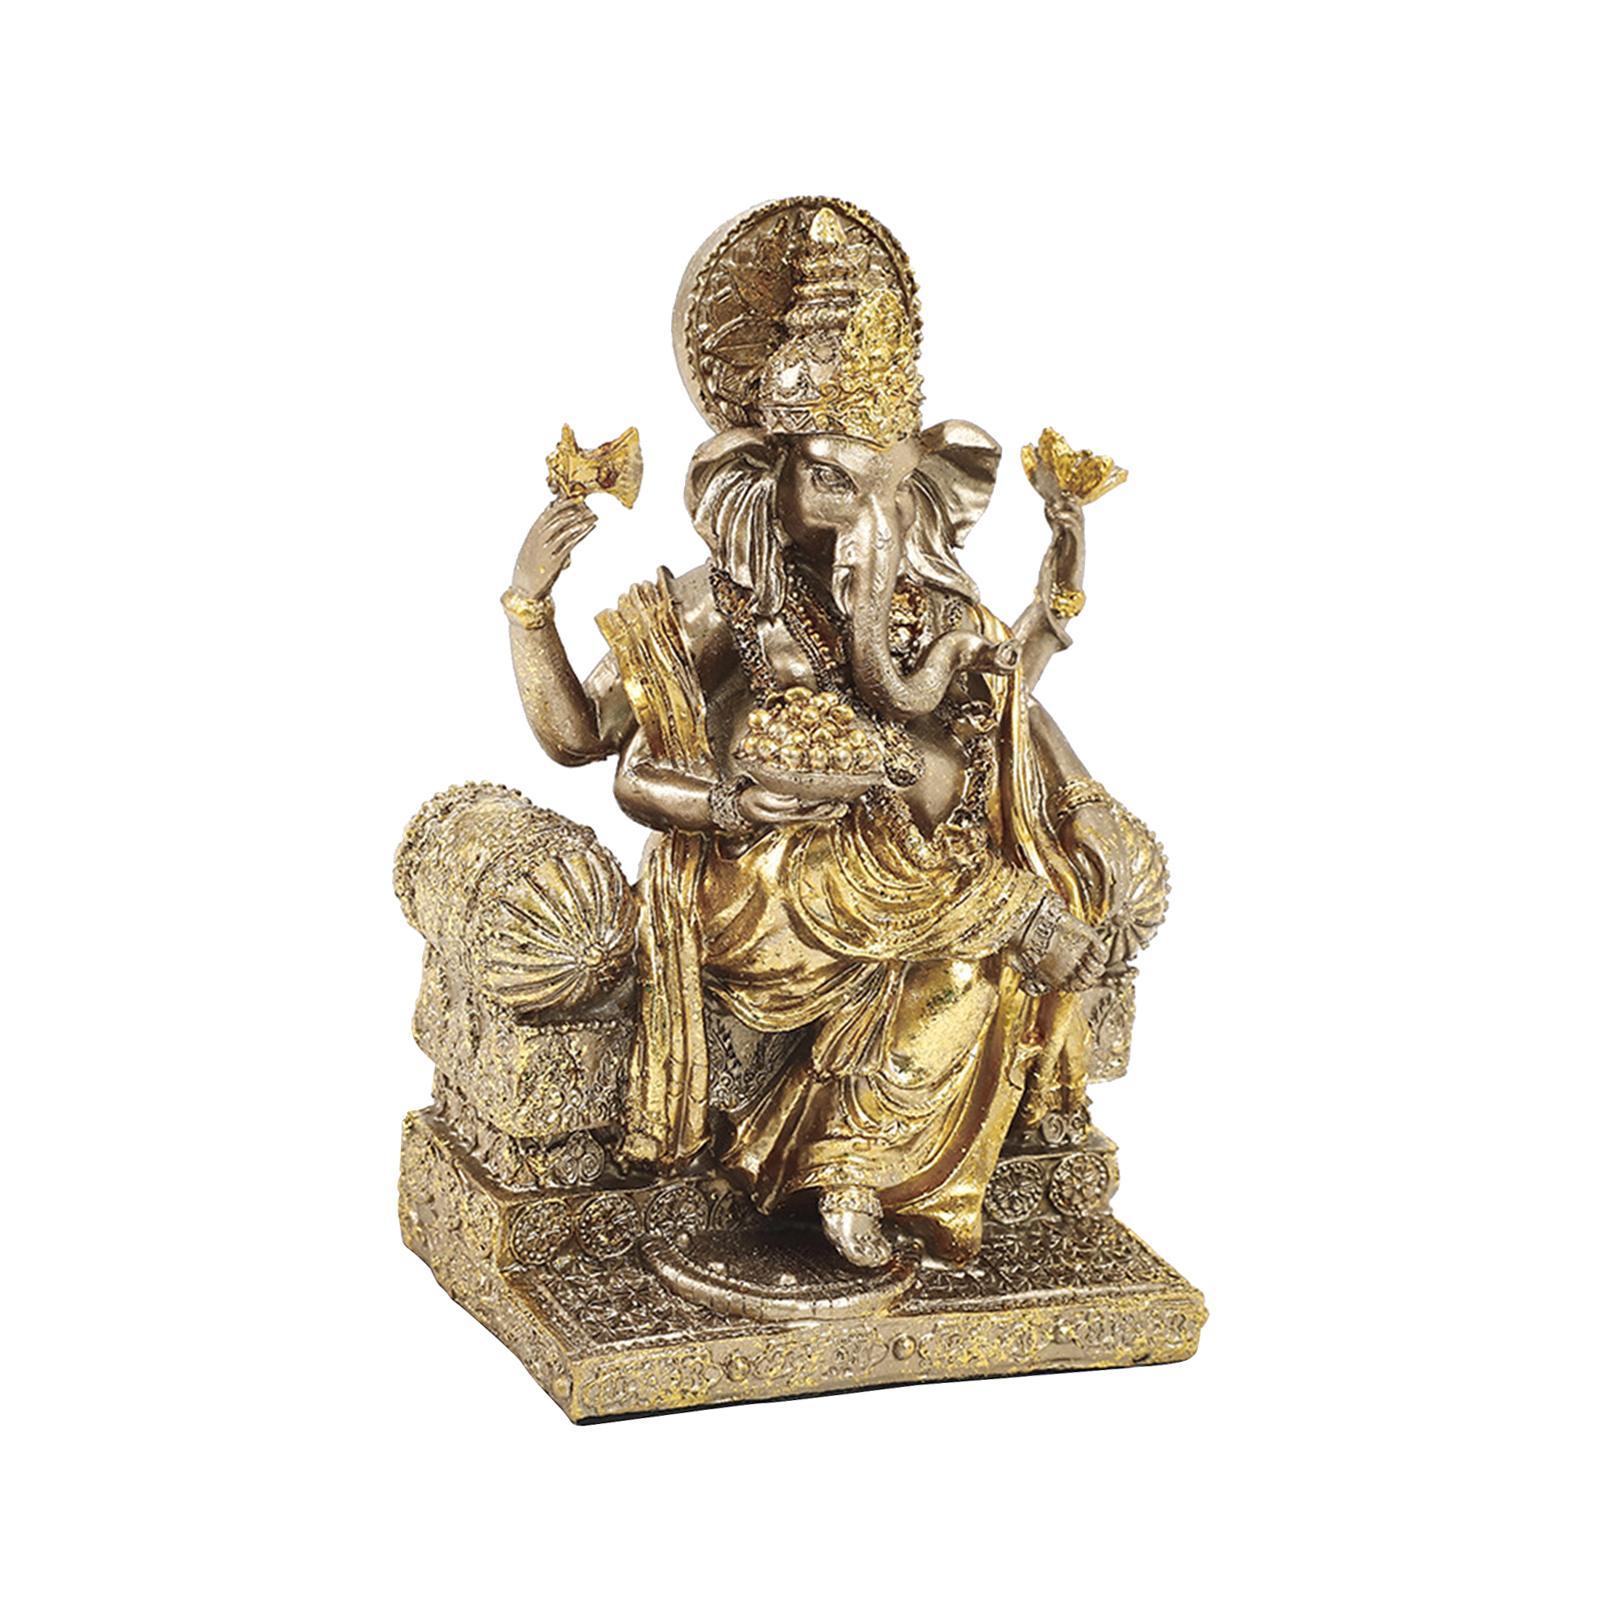 Lord Statues Souvenirs Gifts Figurine for Office Car Ornament